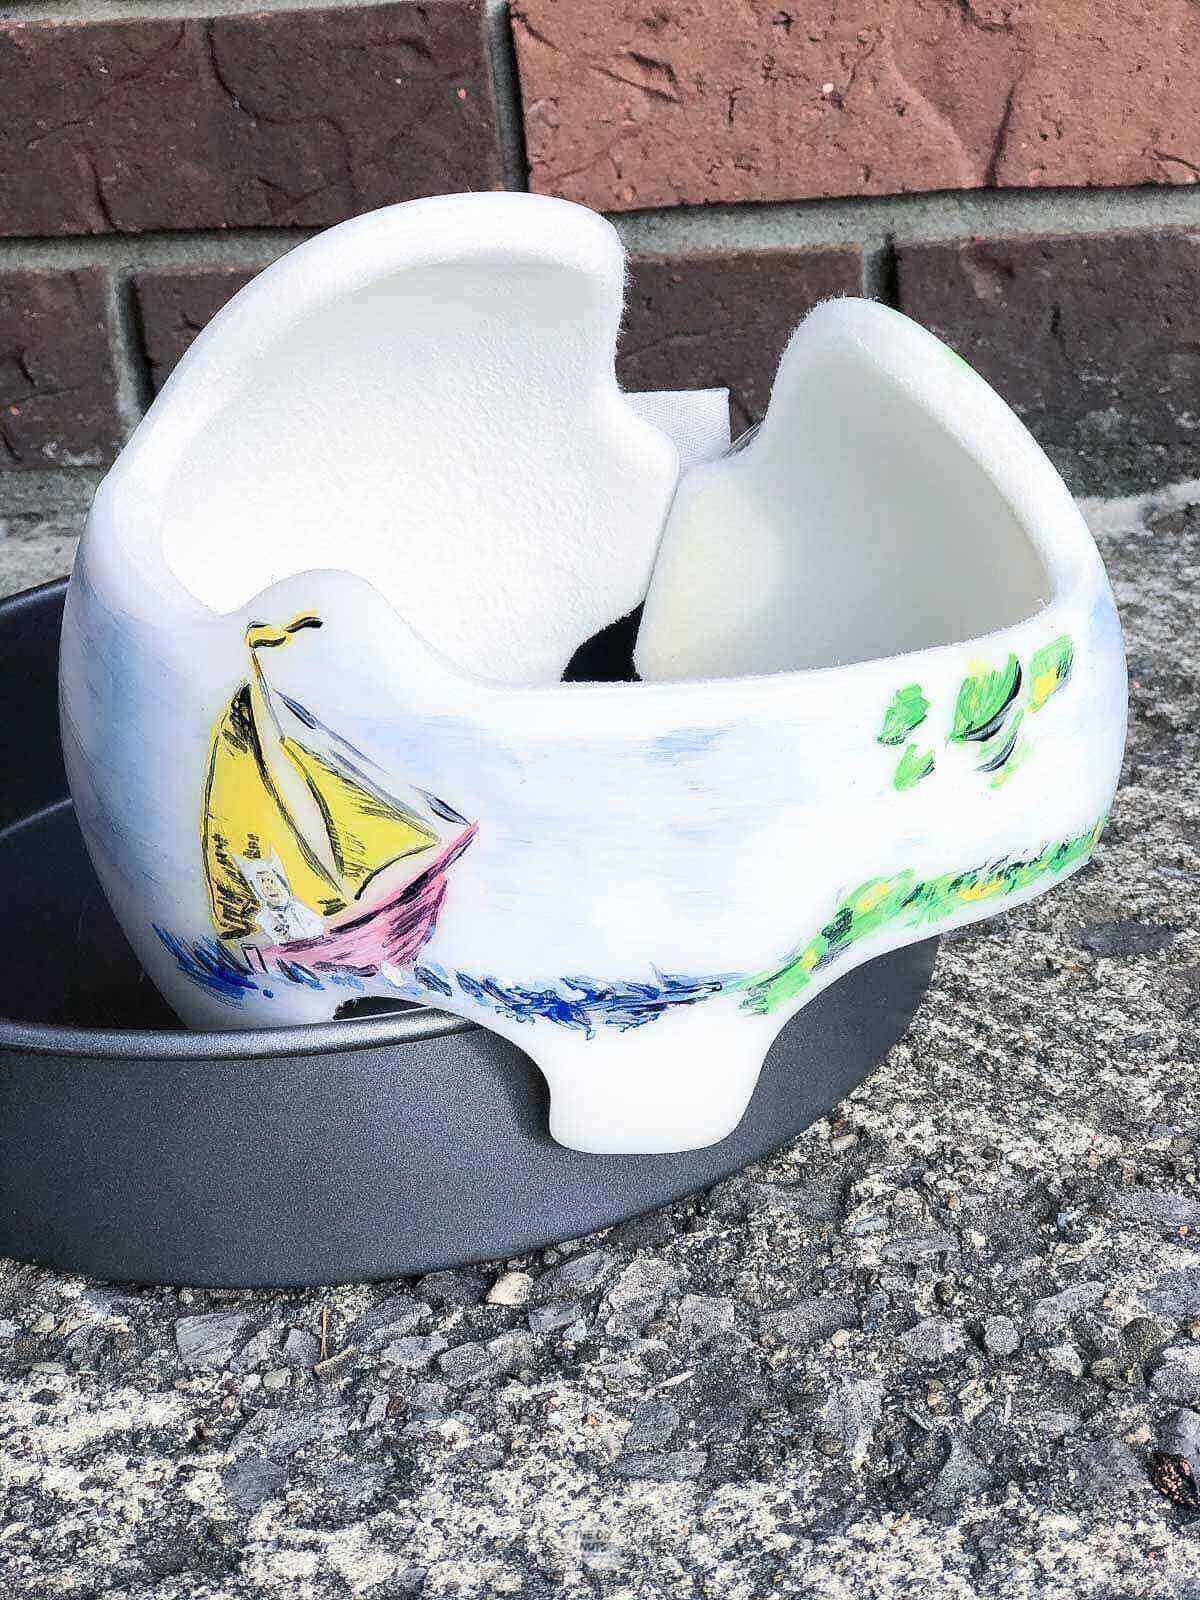 baby helmet with painted boat and sky design in baking pan drying.